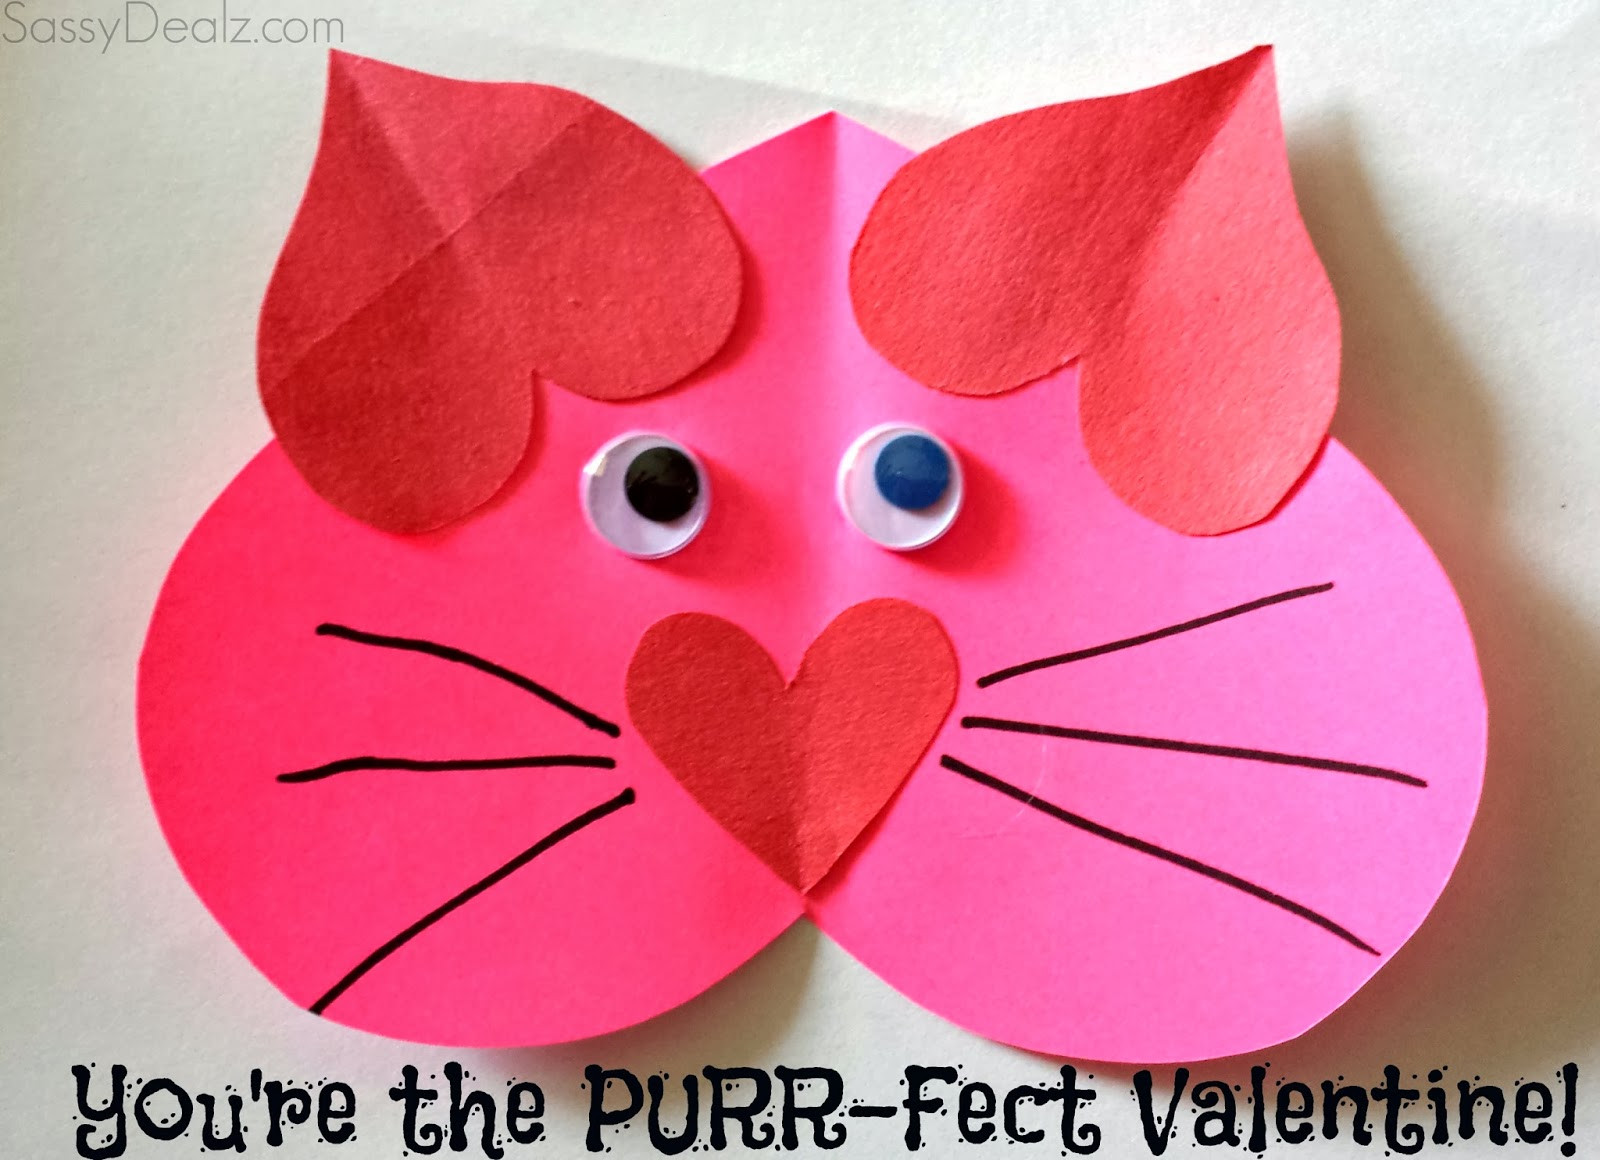 Valentine Crafts For Preschoolers To Make
 5 Easy and Fun Homemade Valentines Kids Can Make